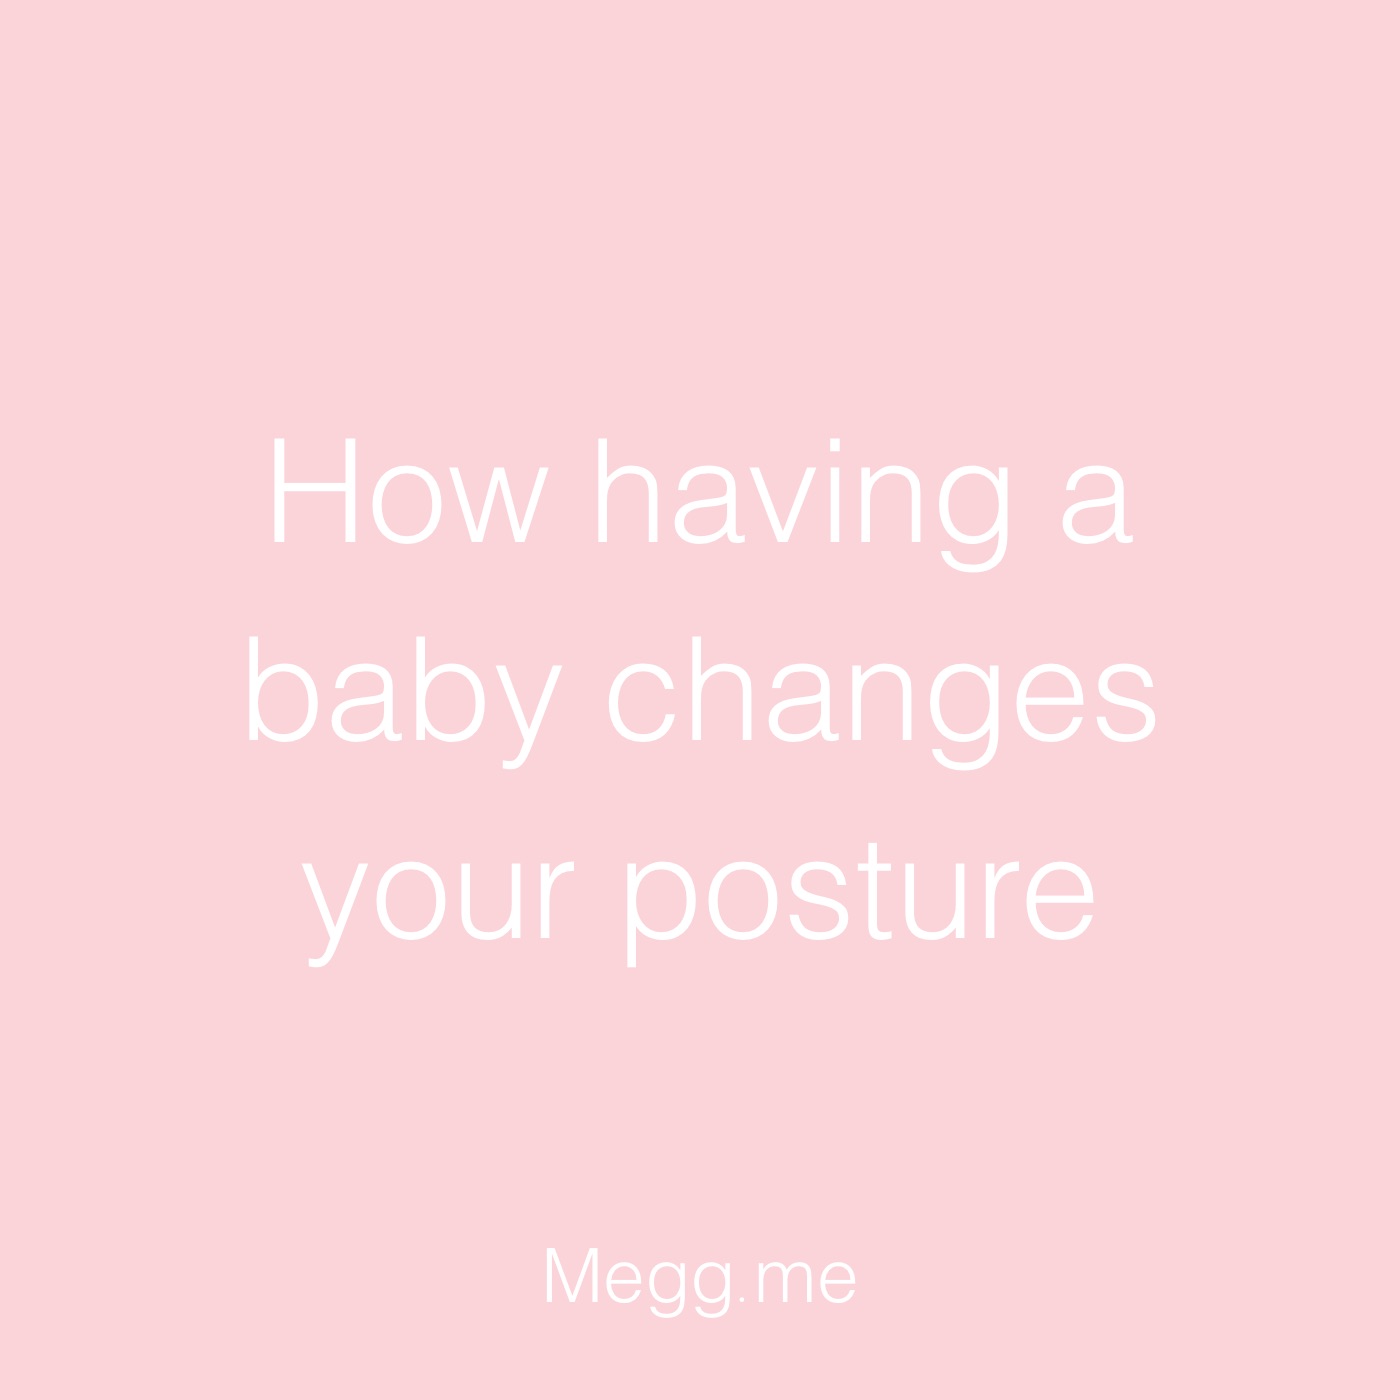 How having a baby changes your posture